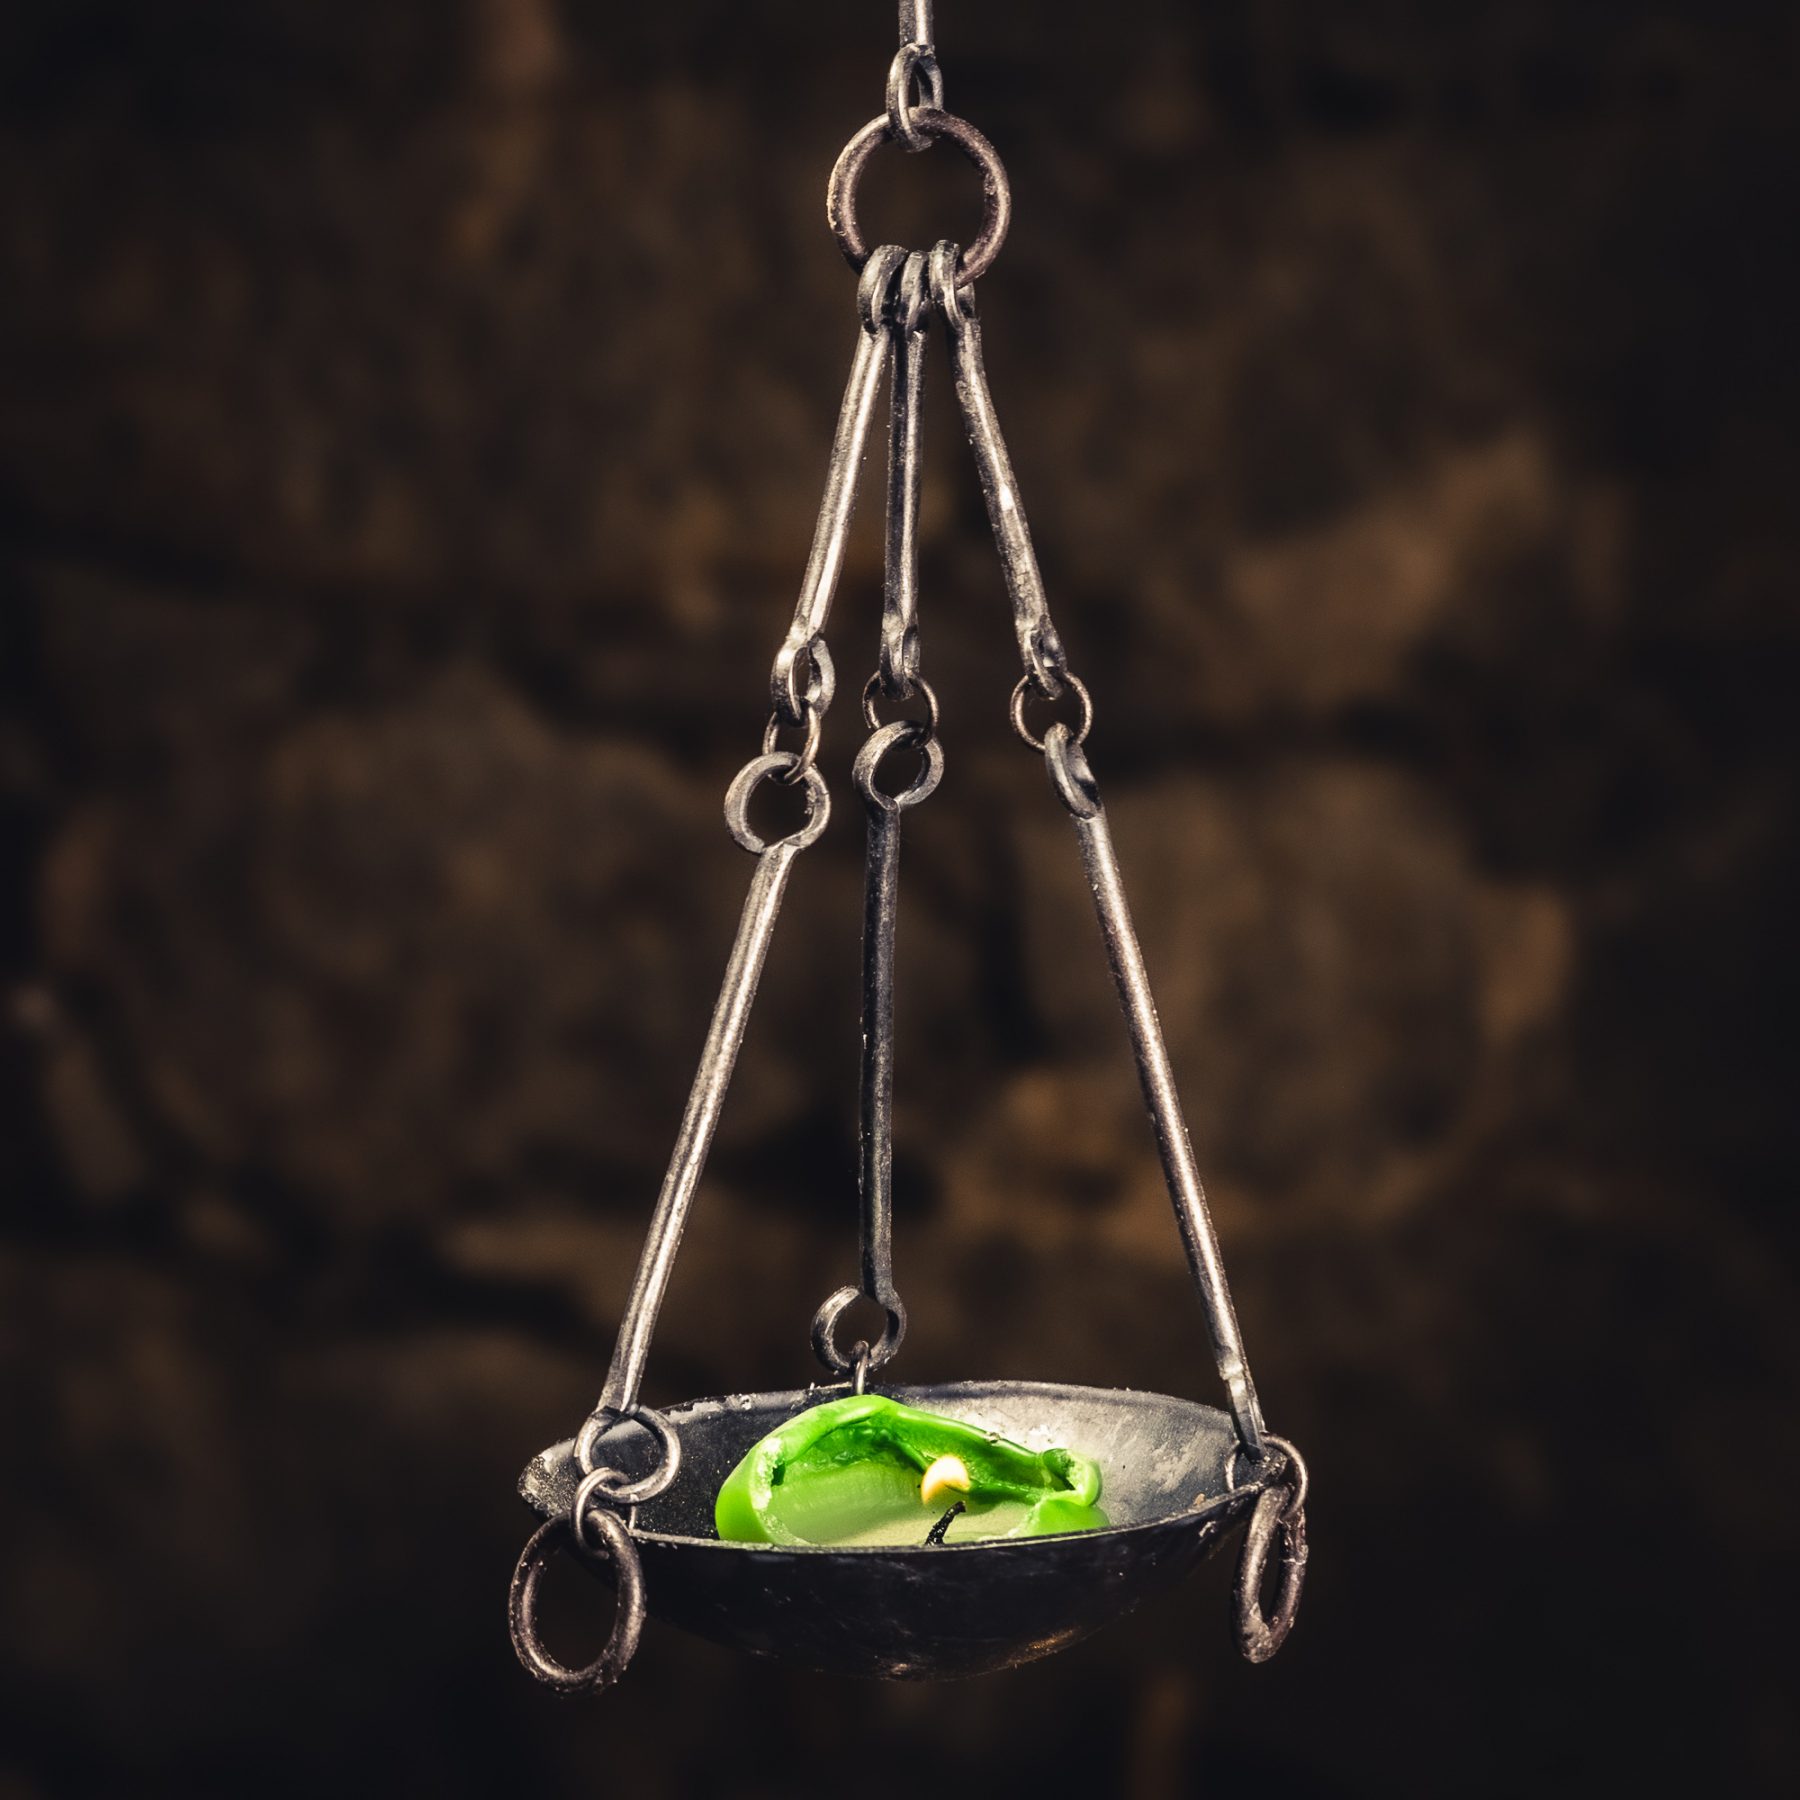 Hanging Oil Lamp without Cover